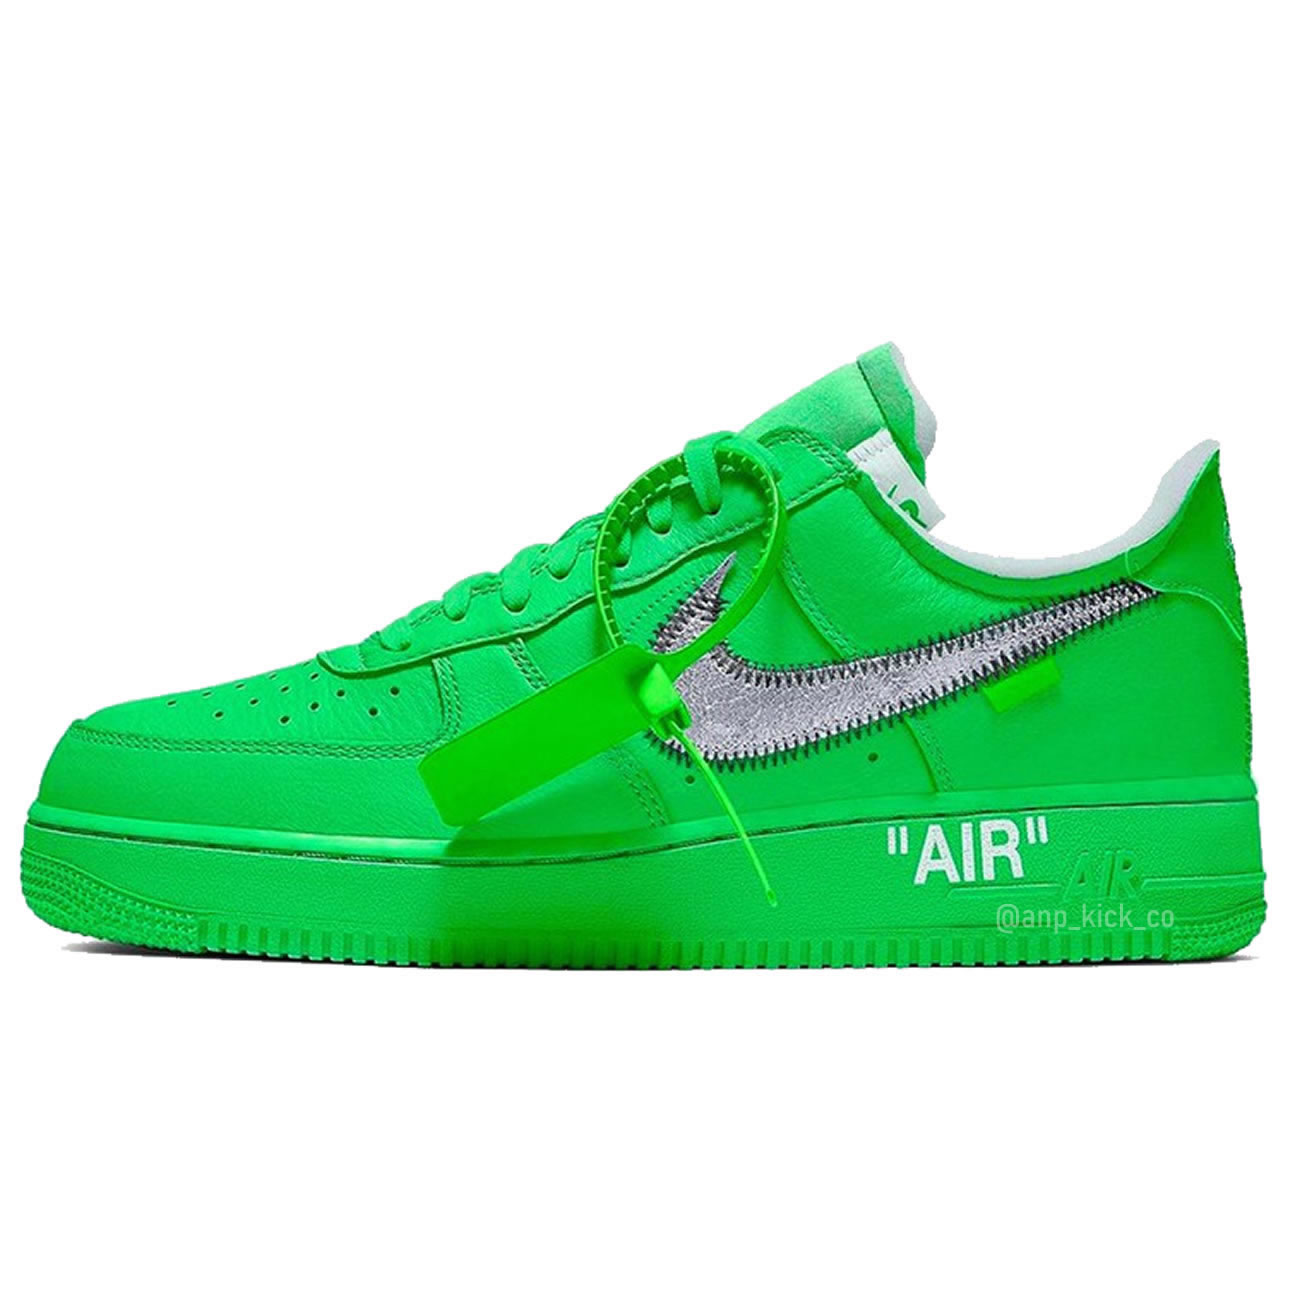 Off White Nike Air Force 1 Low Light Green (1) - newkick.org